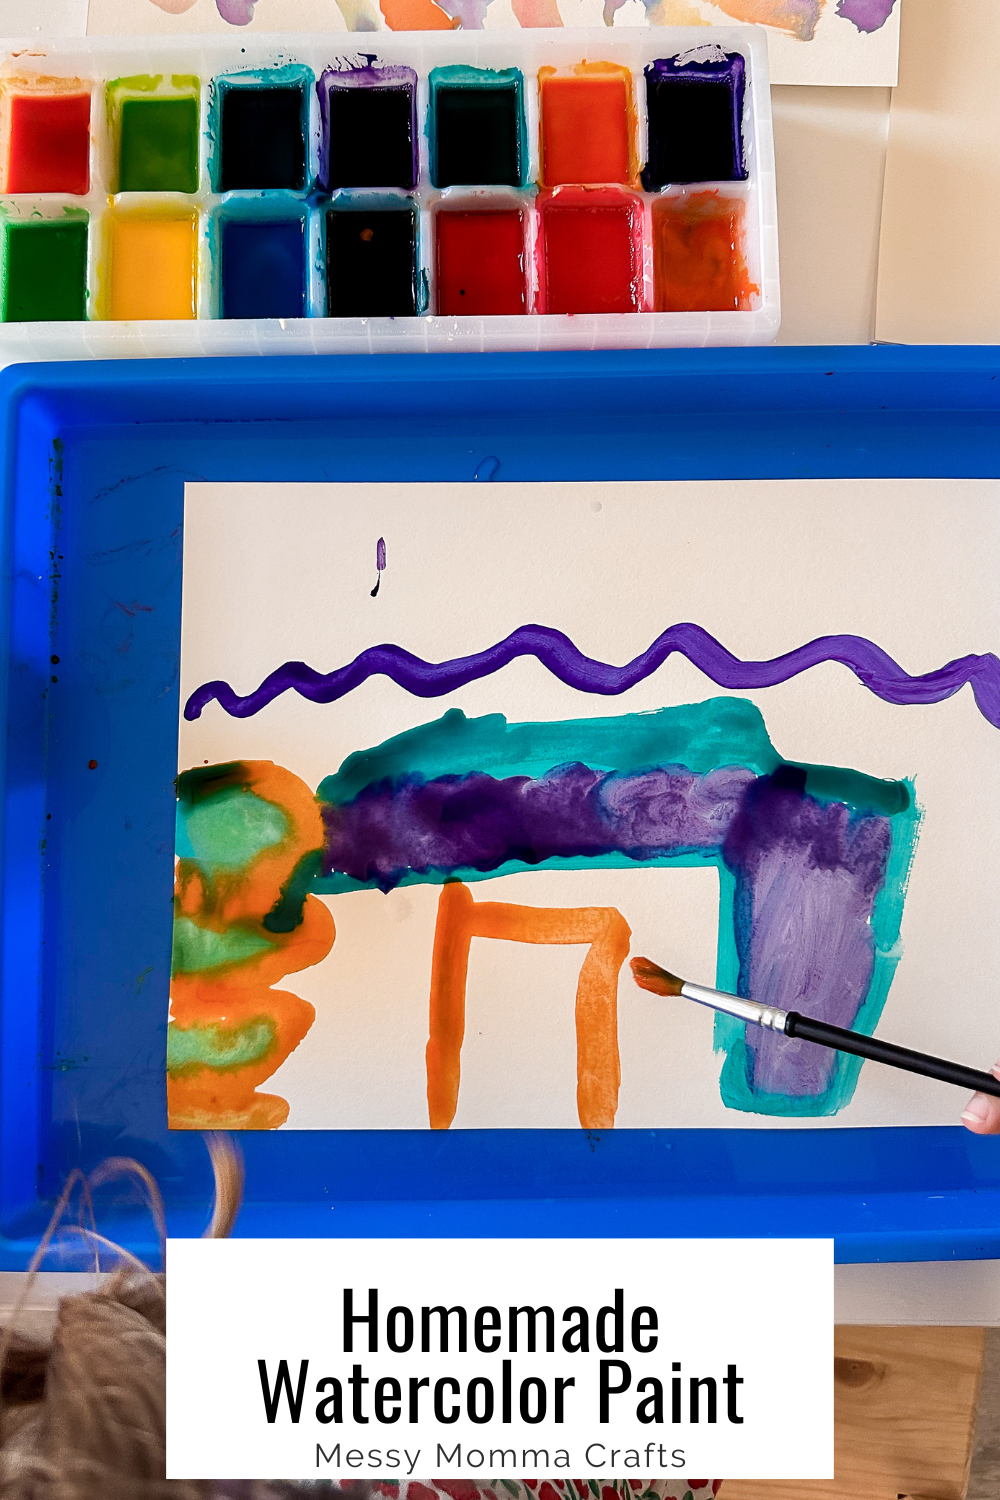 Child paint with homemade watercolor paints